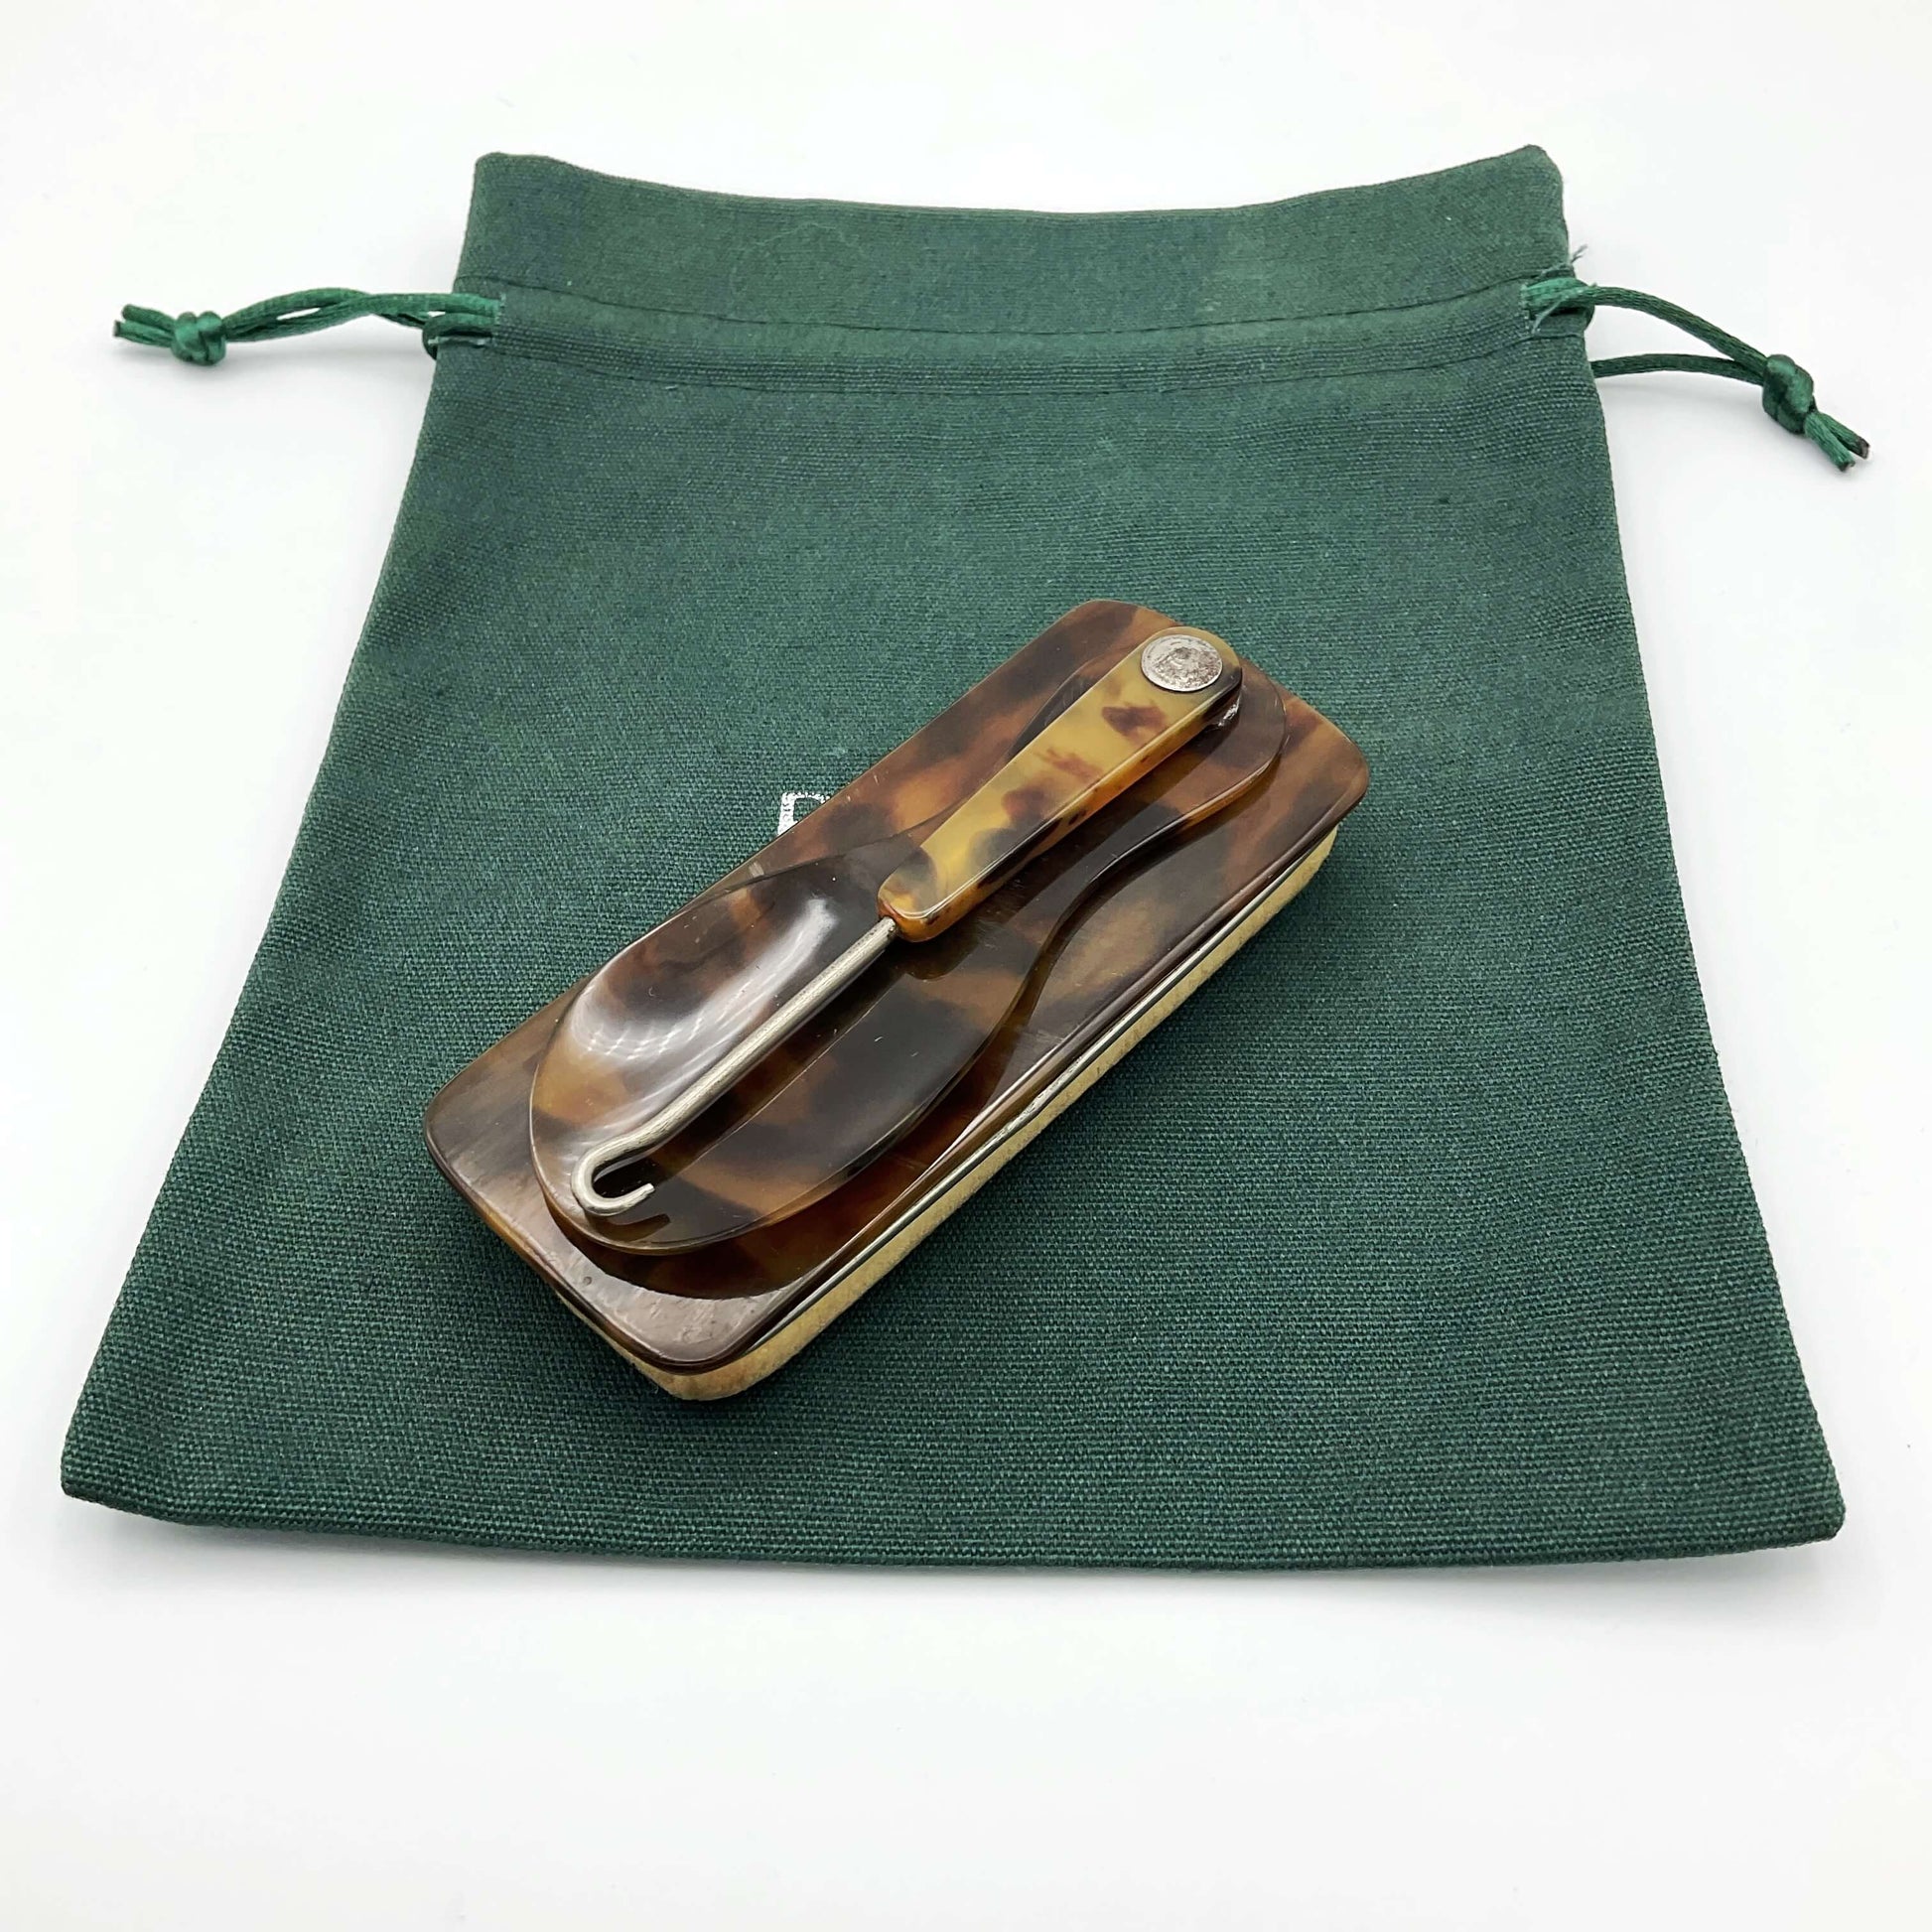 Vintage Shoe Horn Hook and Buffer on a green cotton bag